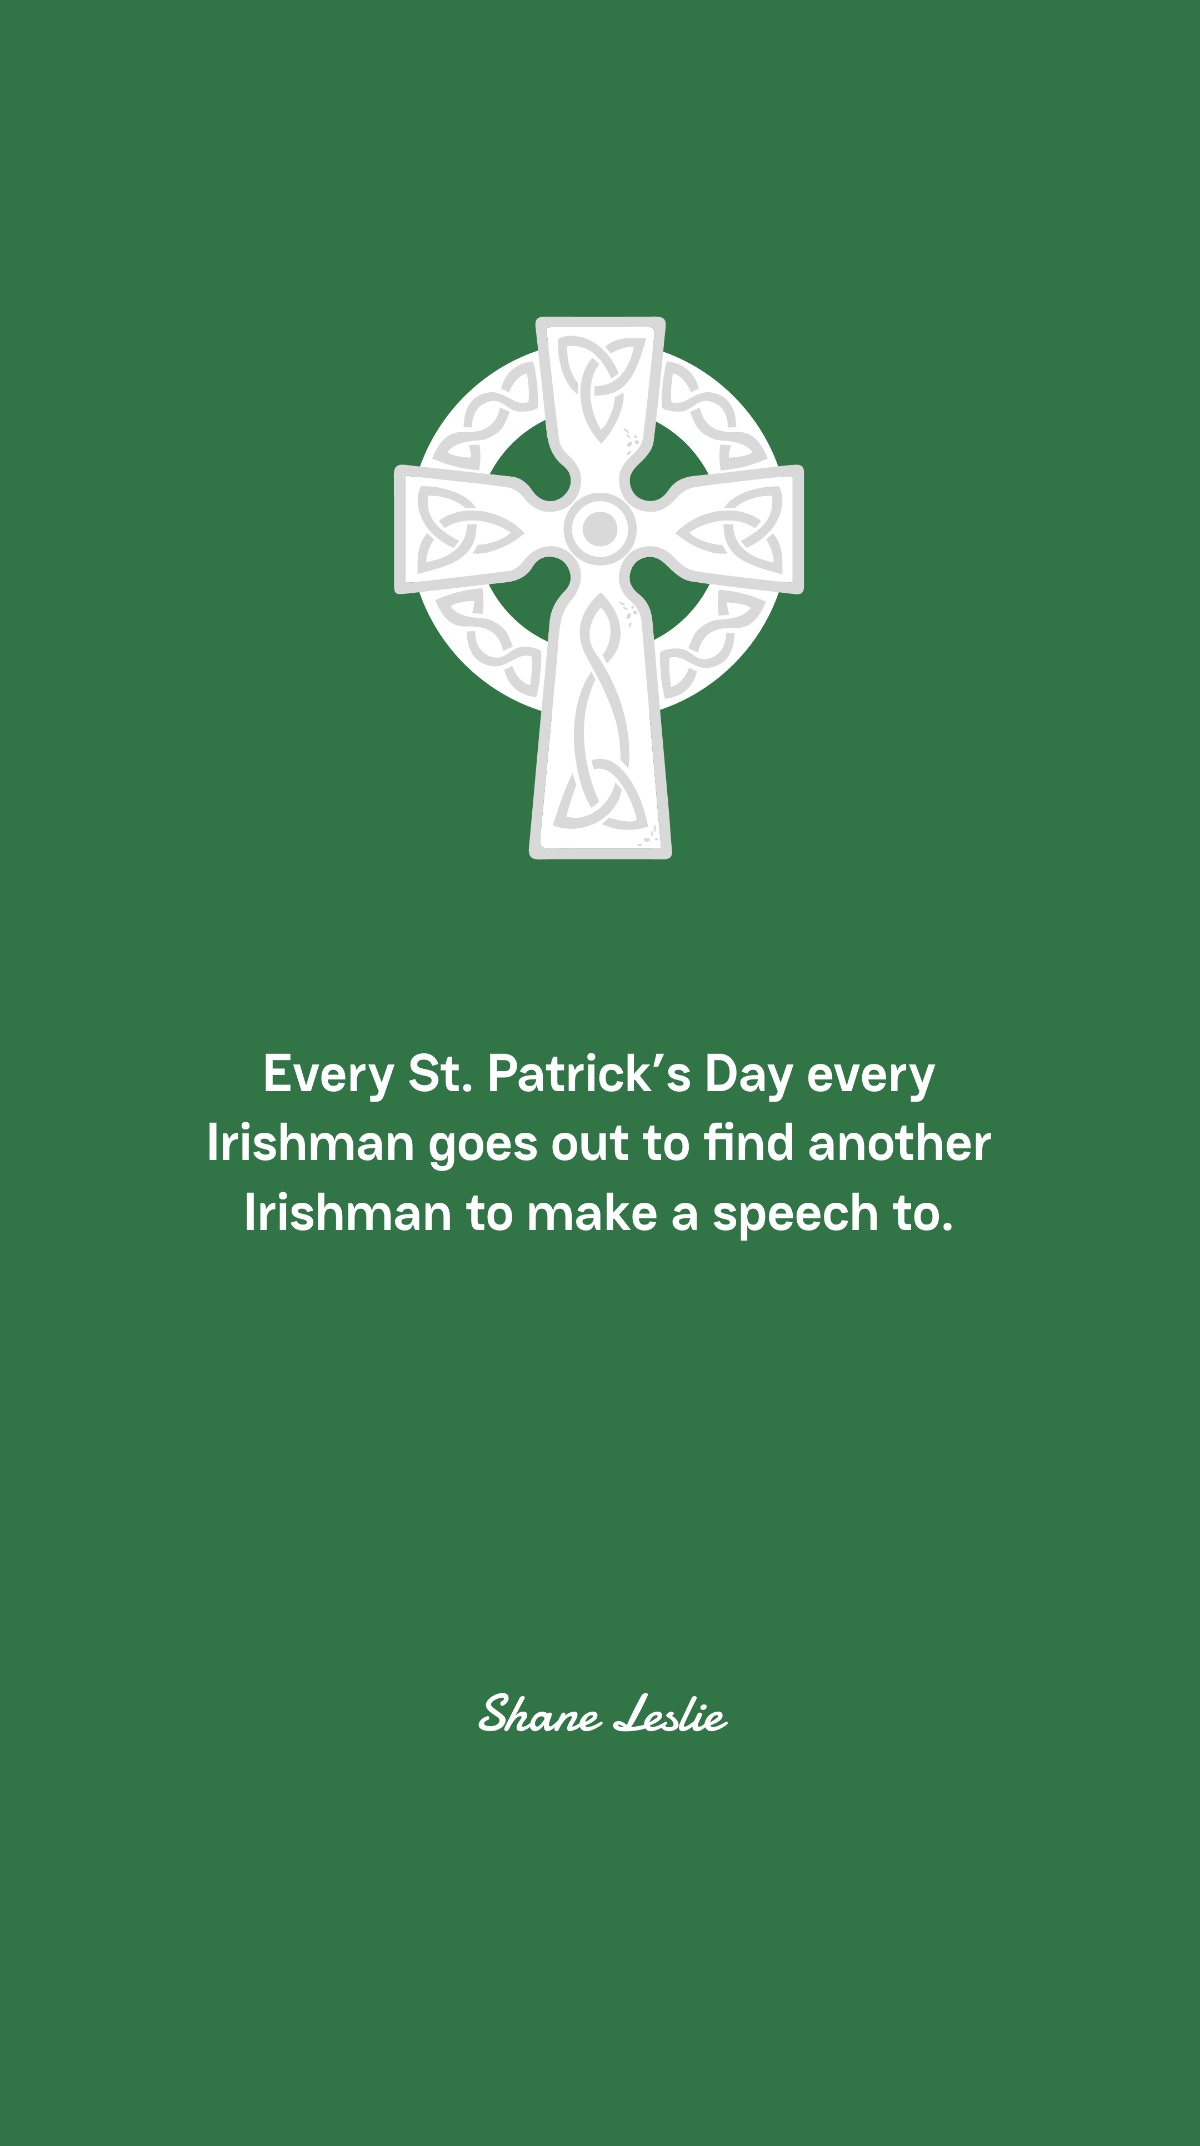 Shane Leslie - Every St. Patrick’s Day every Irishman goes out to find another Irishman to make a speech to. Template